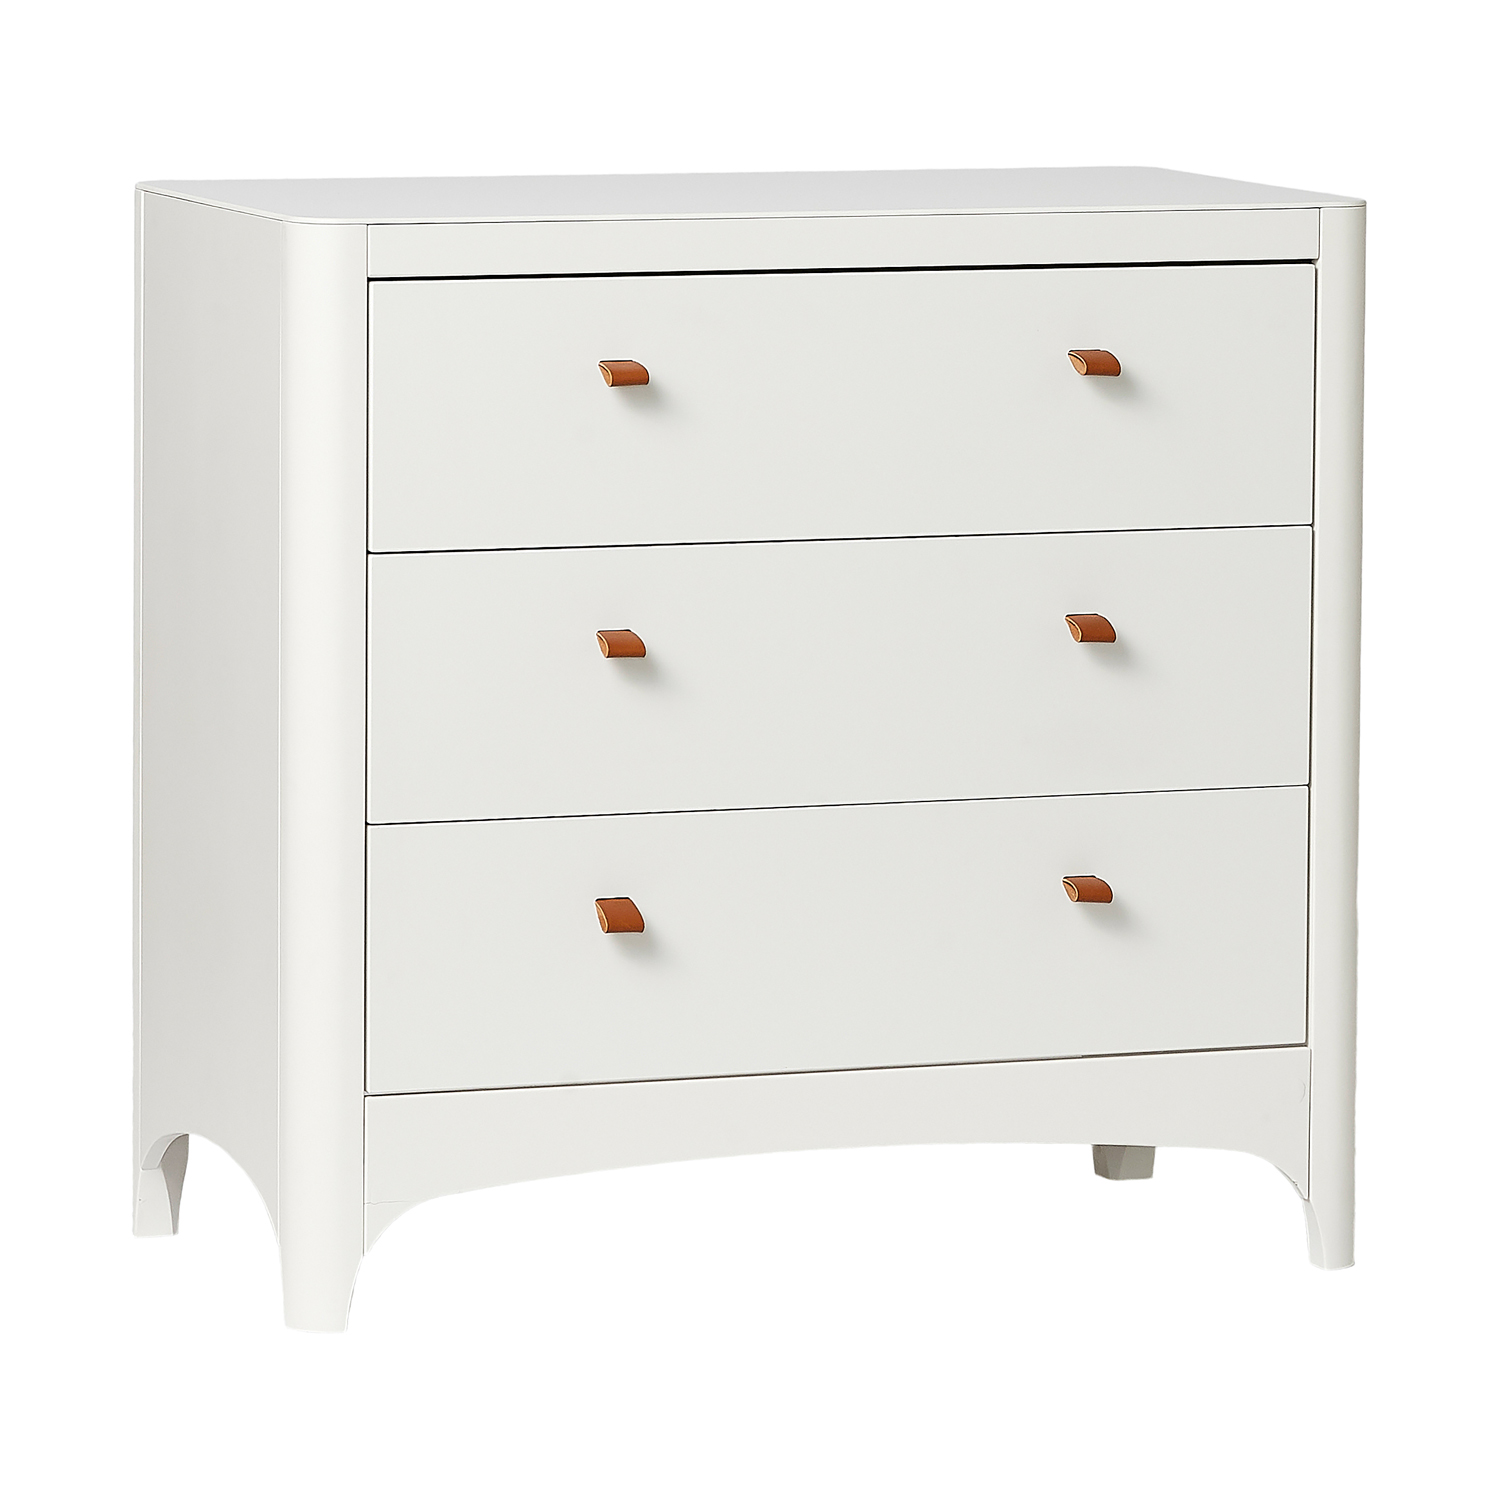 Leander Classic Commode - White